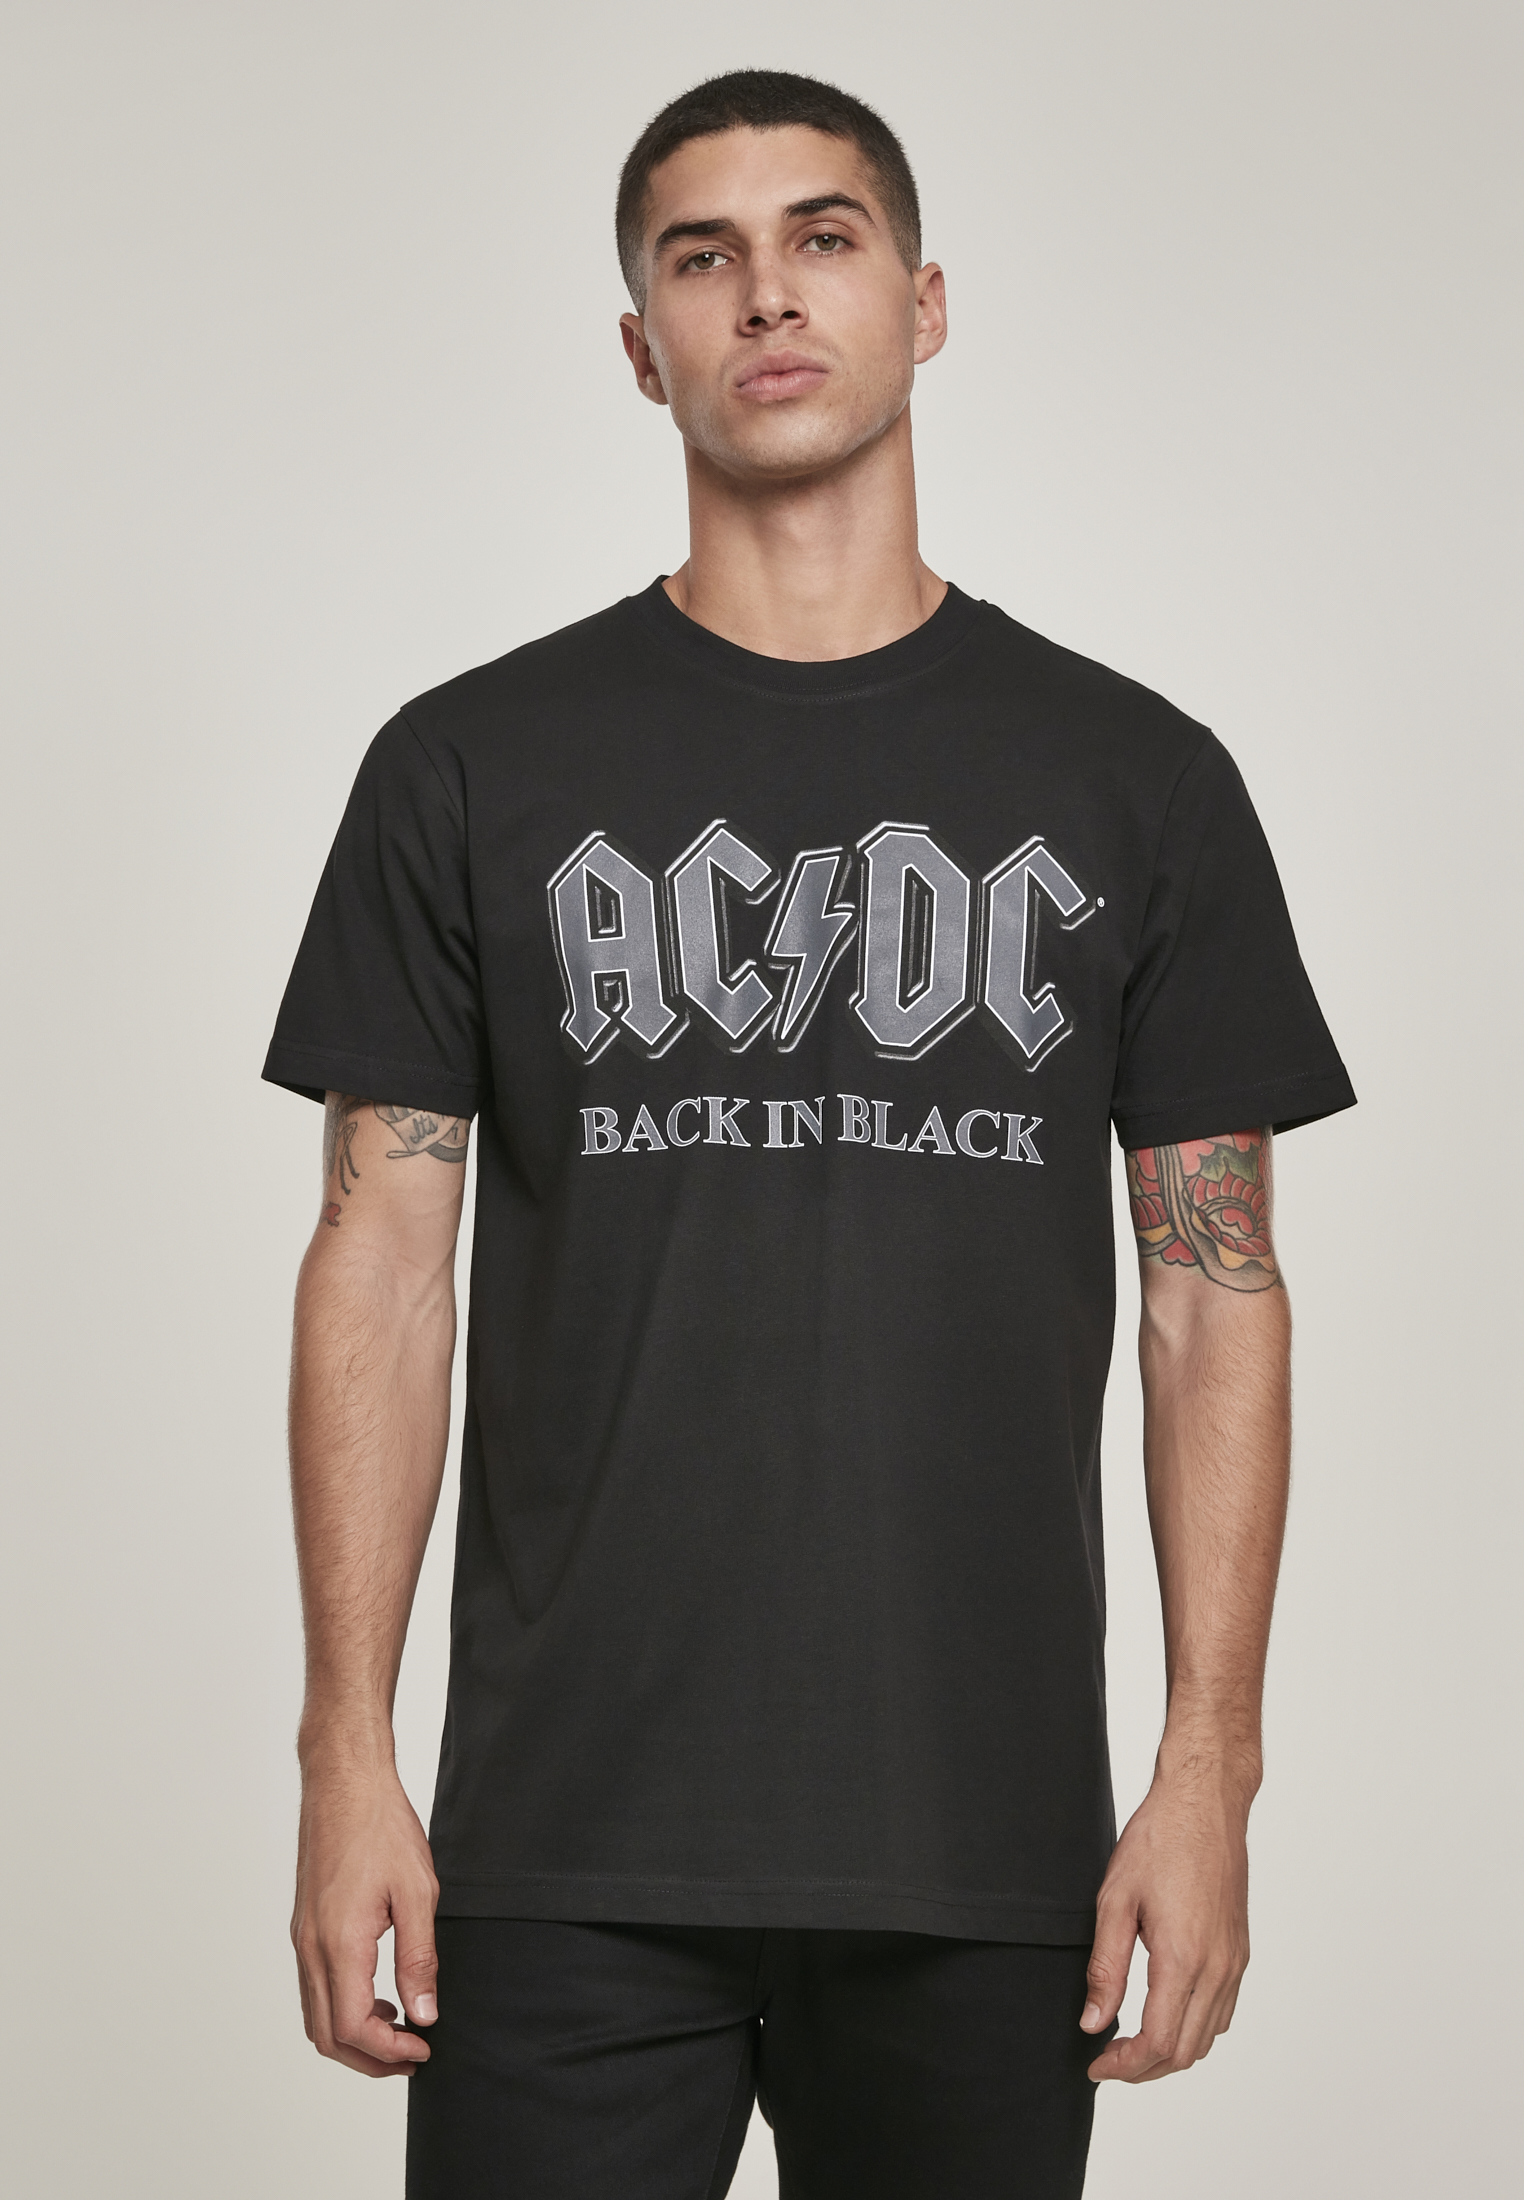 ACDC Back In Black Tee-MC480